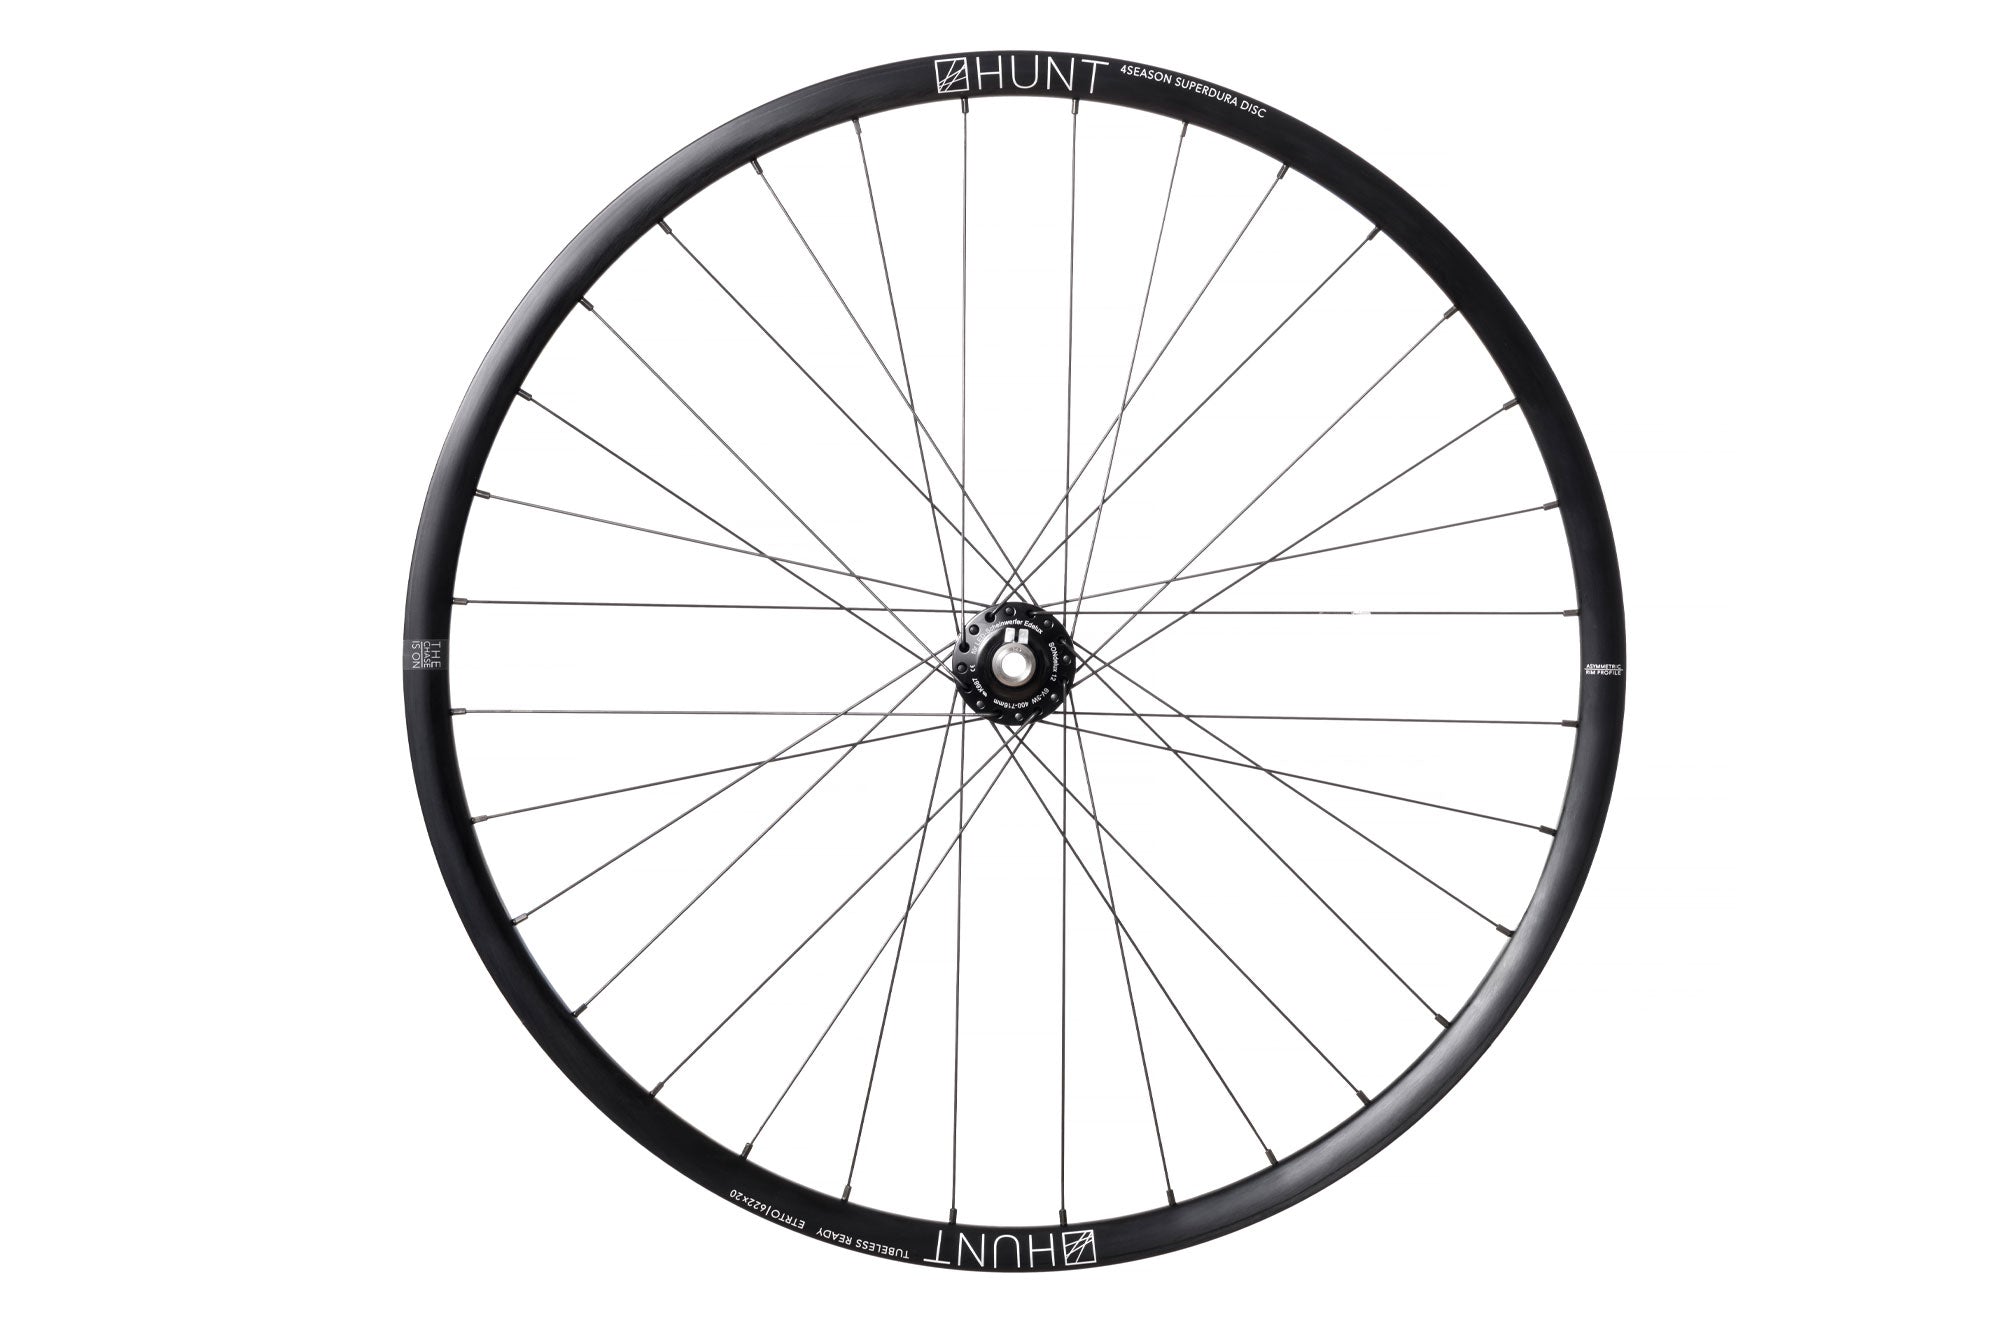 <h1>Rims</h1><i>A strong and lightweight 6061-T6 heat-treated rim features an asymmetric shape which is inverted from front to rear to provide balanced higher spoke tensions meaning your spokes stay tight for the long term. The rim profile is disc specific which allows higher-strength to weight as no reinforcement is required for a braking surface. The extra wide rim at 25mm (20mm internal) which creates a great tire profile with wider 25-50mm tyres, giving excellent grip and lower rolling resistance.</i>